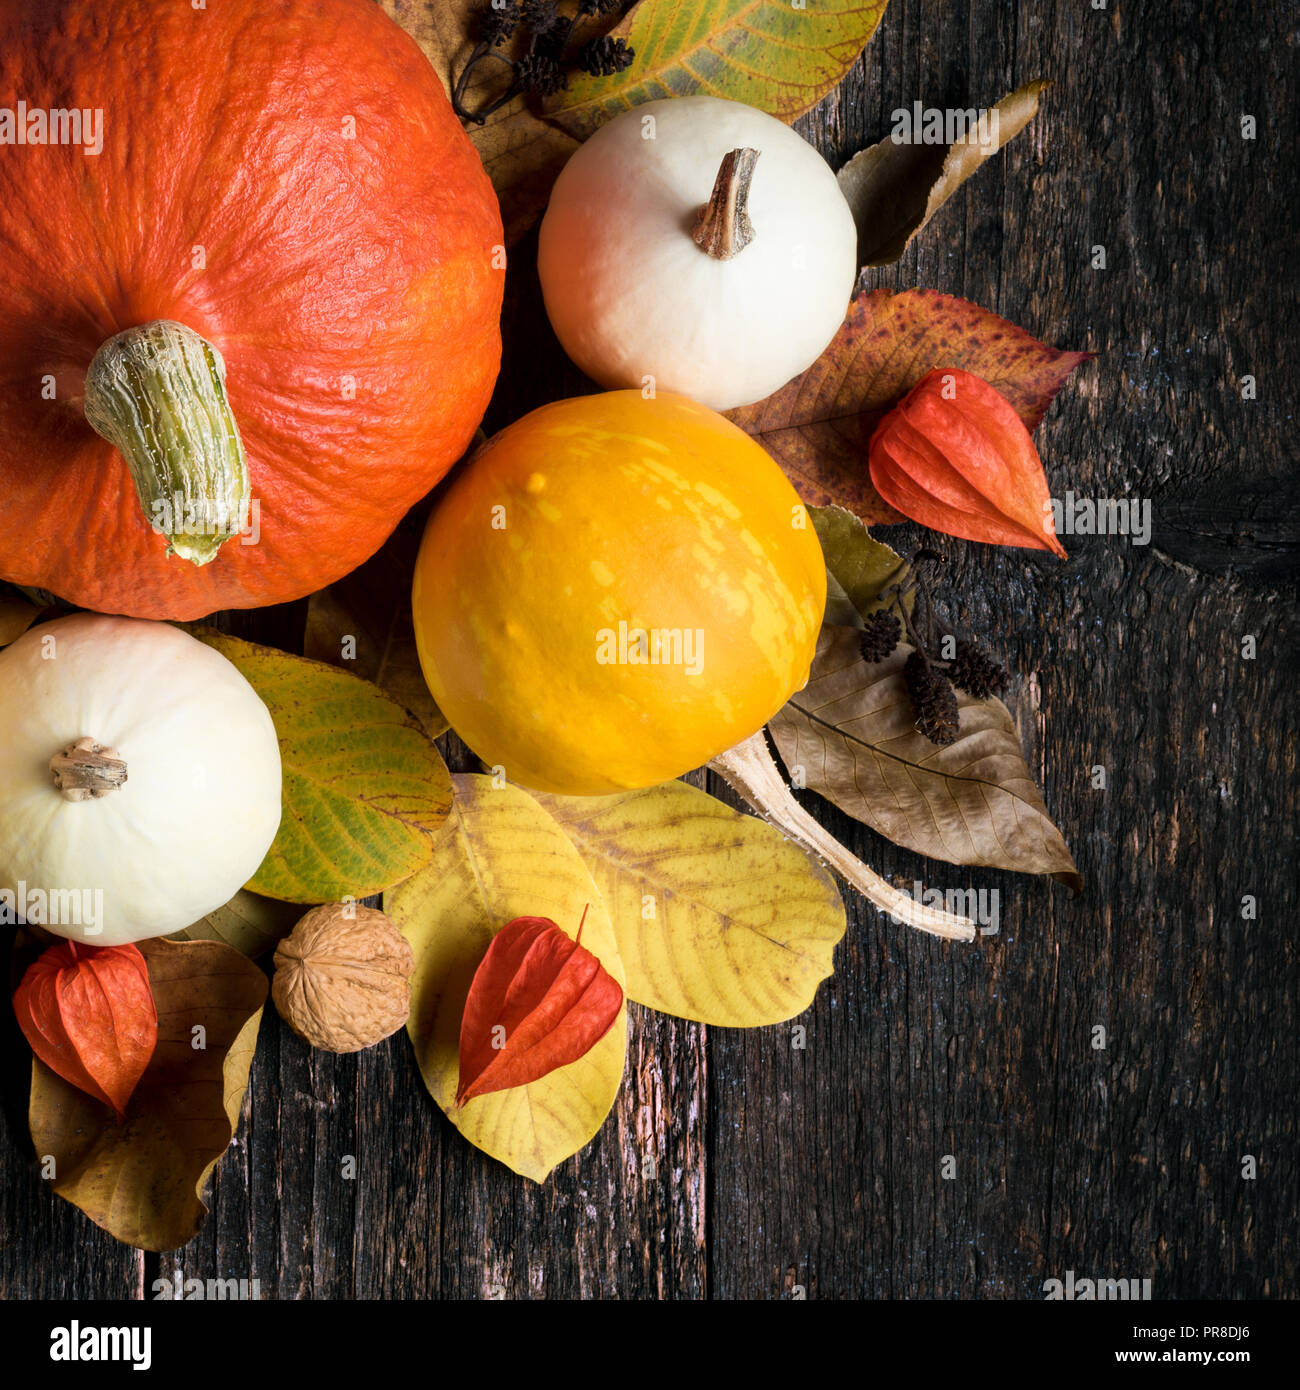 Autumn Harvest and Holiday still life. Happy Thanksgiving Background. Selection of various pumpkins on dark wooden background. Autumn vegetables and s Stock Photo